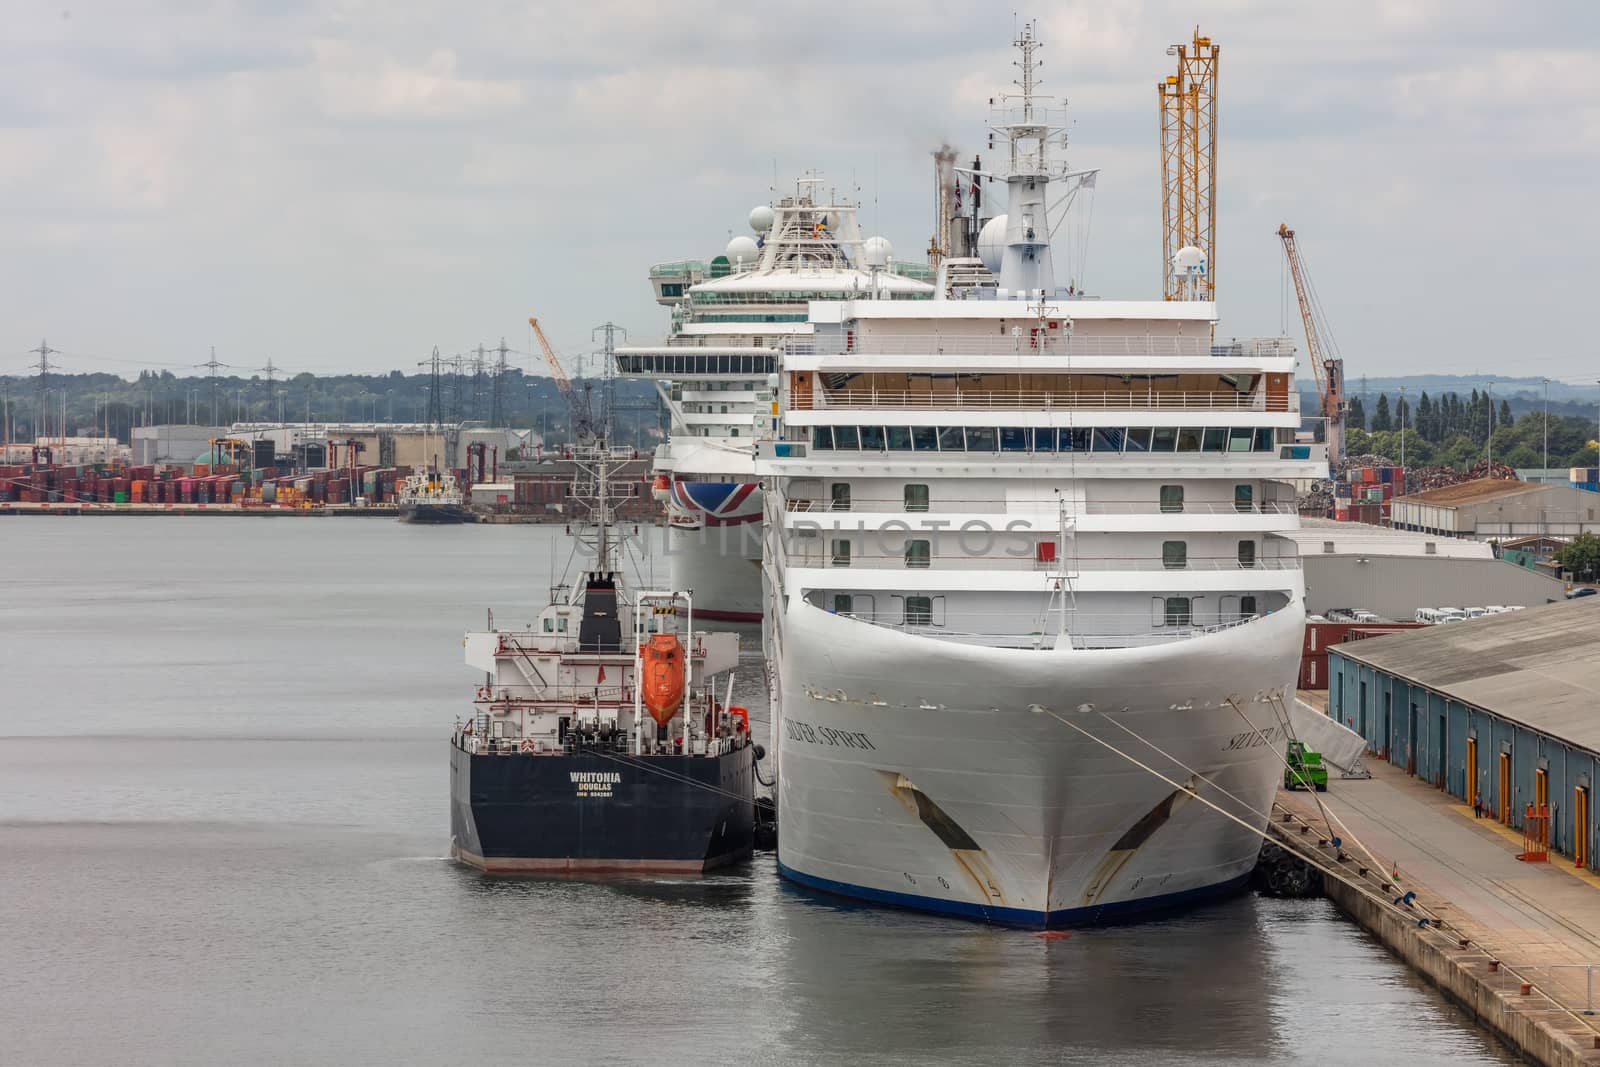 Southampton port, England, UK - June 08, 2020: Silver Spirit cruise ship docked in Southampton port and being refueled by fueling ship Whitonia. Some other cruise ship in the background.